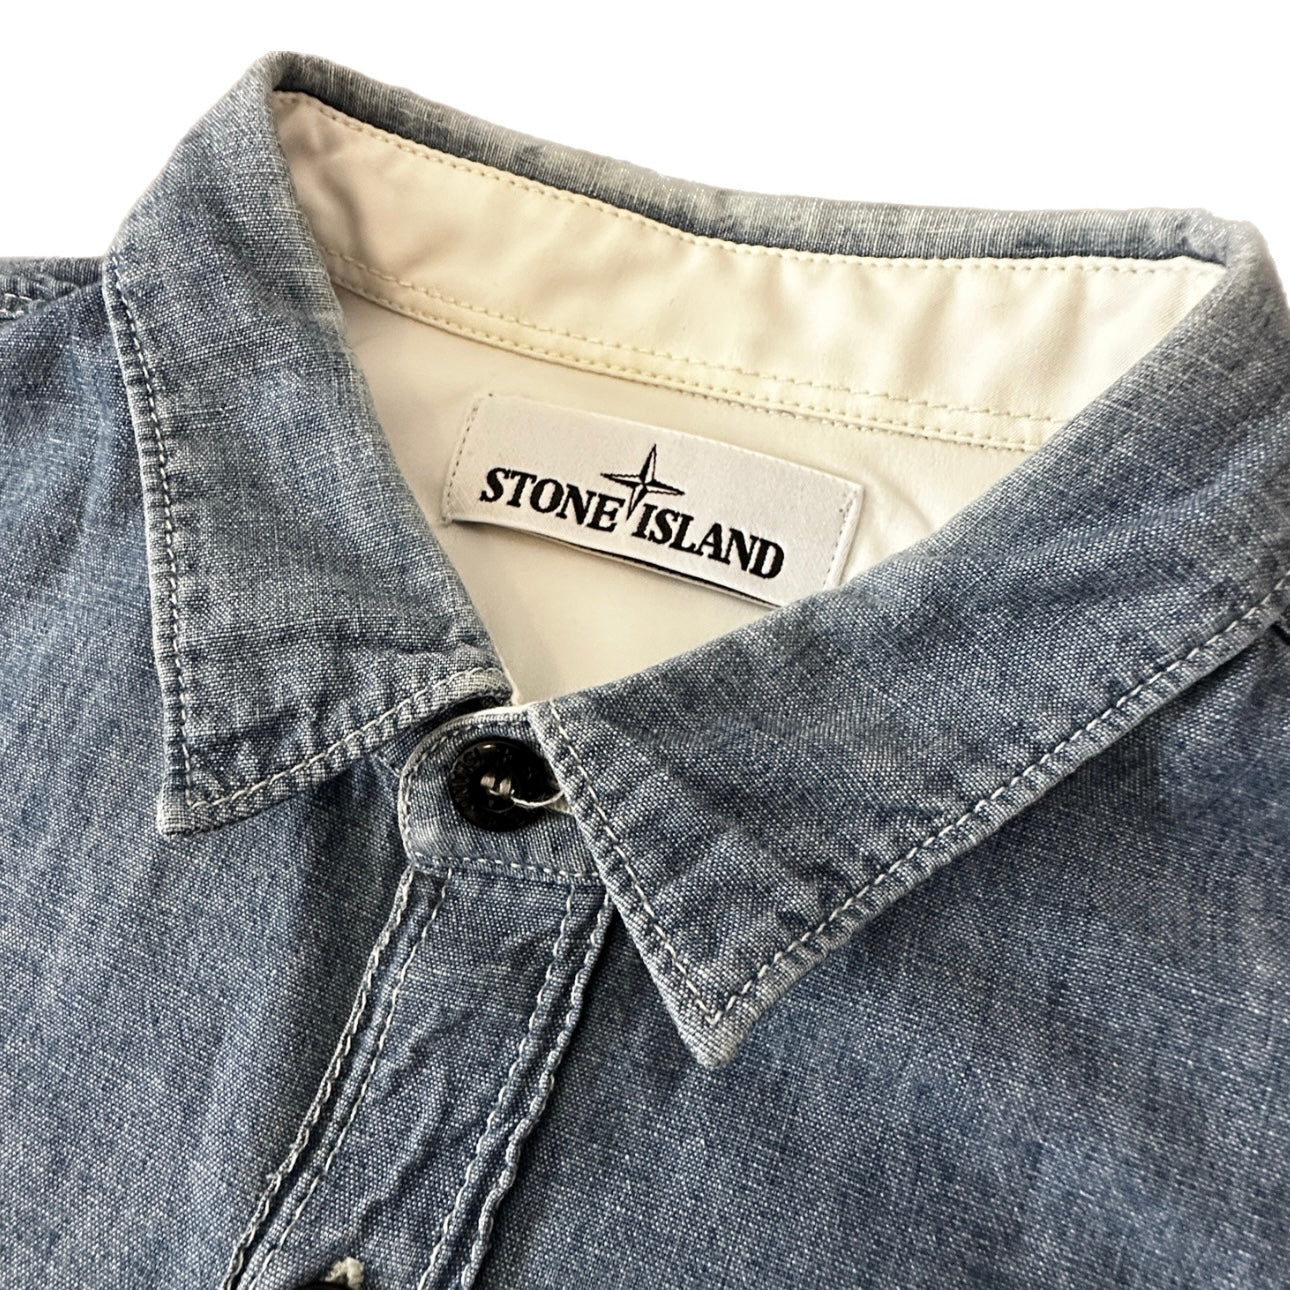 Stone Island 2014 Denim Jeans Shirt - M - Made in Italy